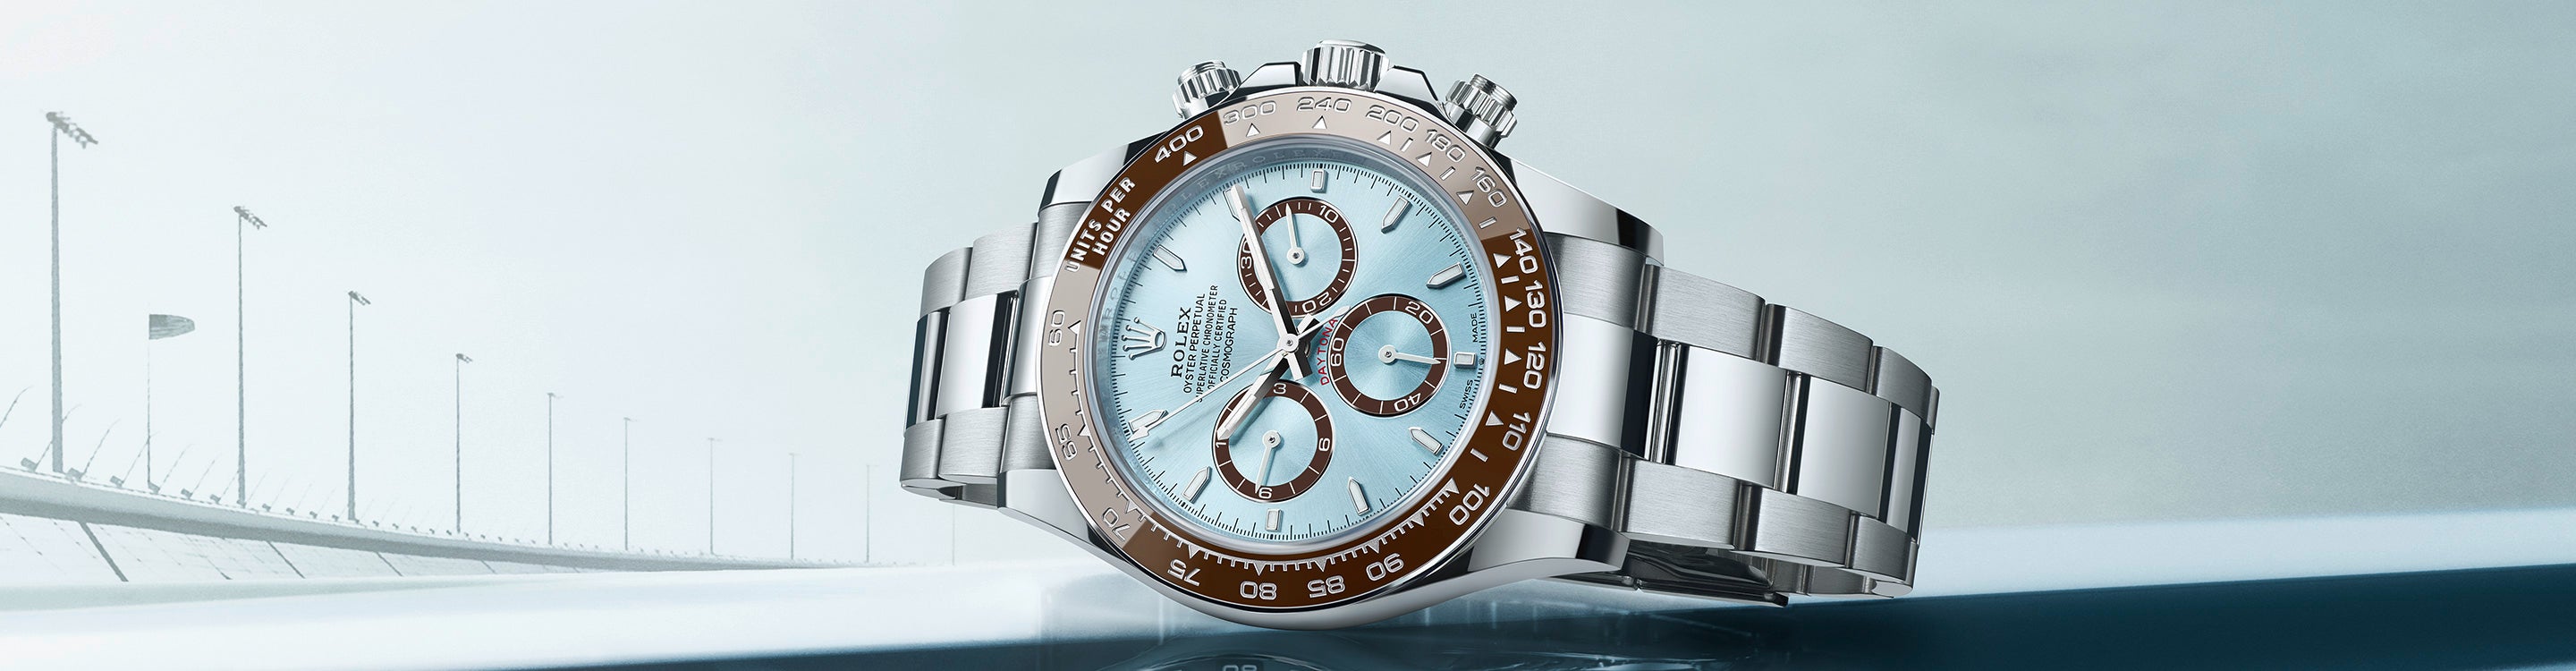 Rolex Cosmograph Daytona with Racetrack Background at Fink's Jewelers